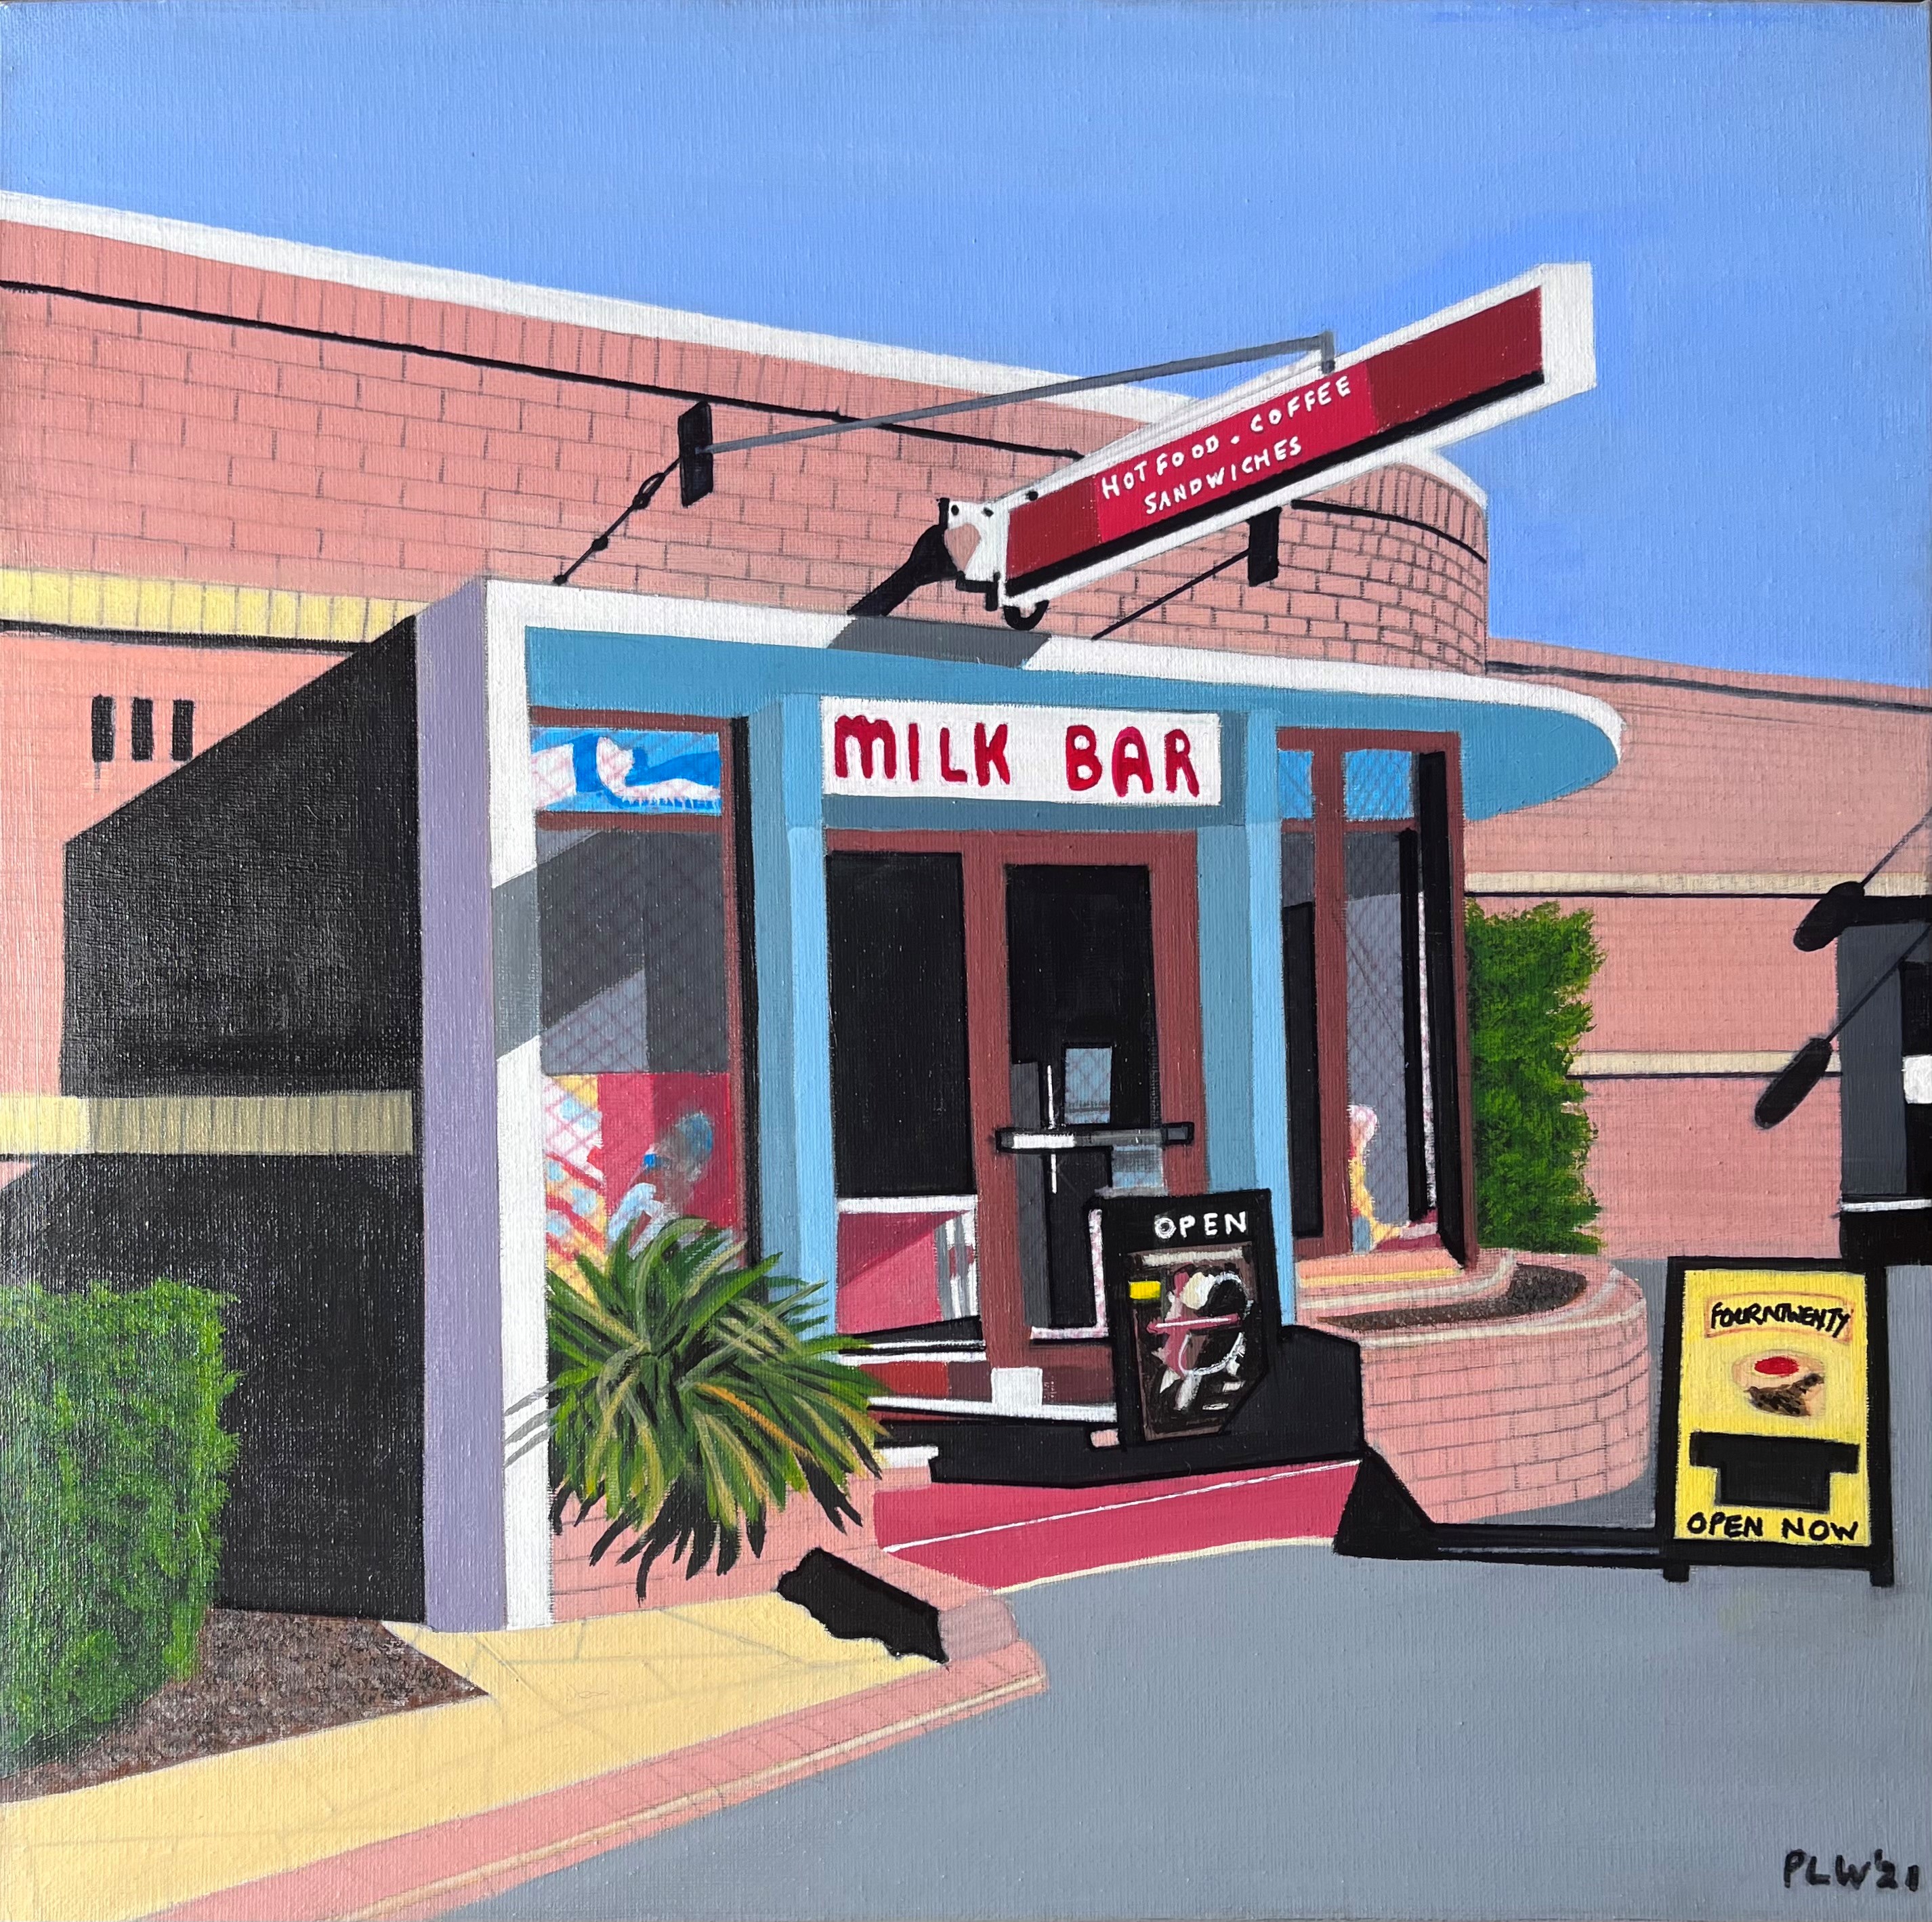 A colourful painting of the Cronulla Milk Bar, a red brick art deco building. The sky is blue and it is a sunny day. The facede of the building is painted light blue and ther is a yellow sandwich board sign on the footpath outside.